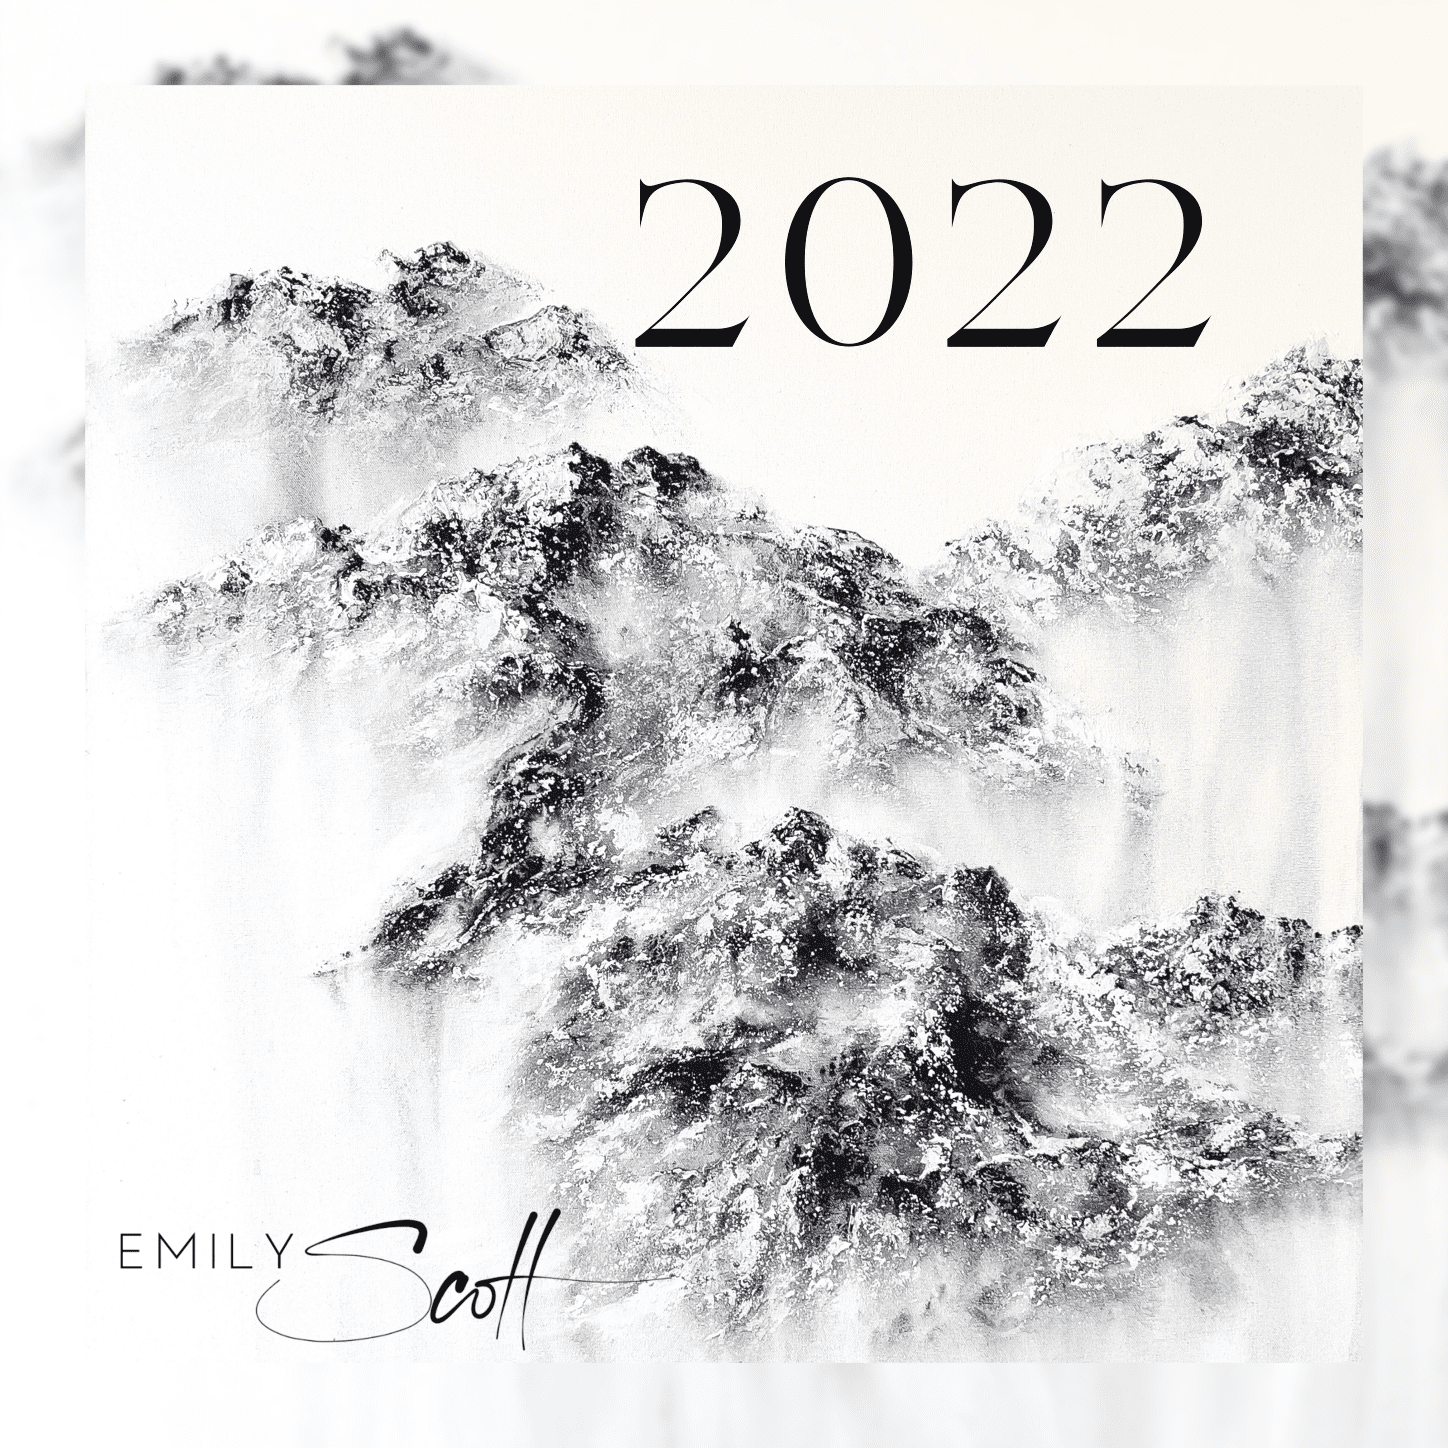 The 2022 Calendar Is Here!